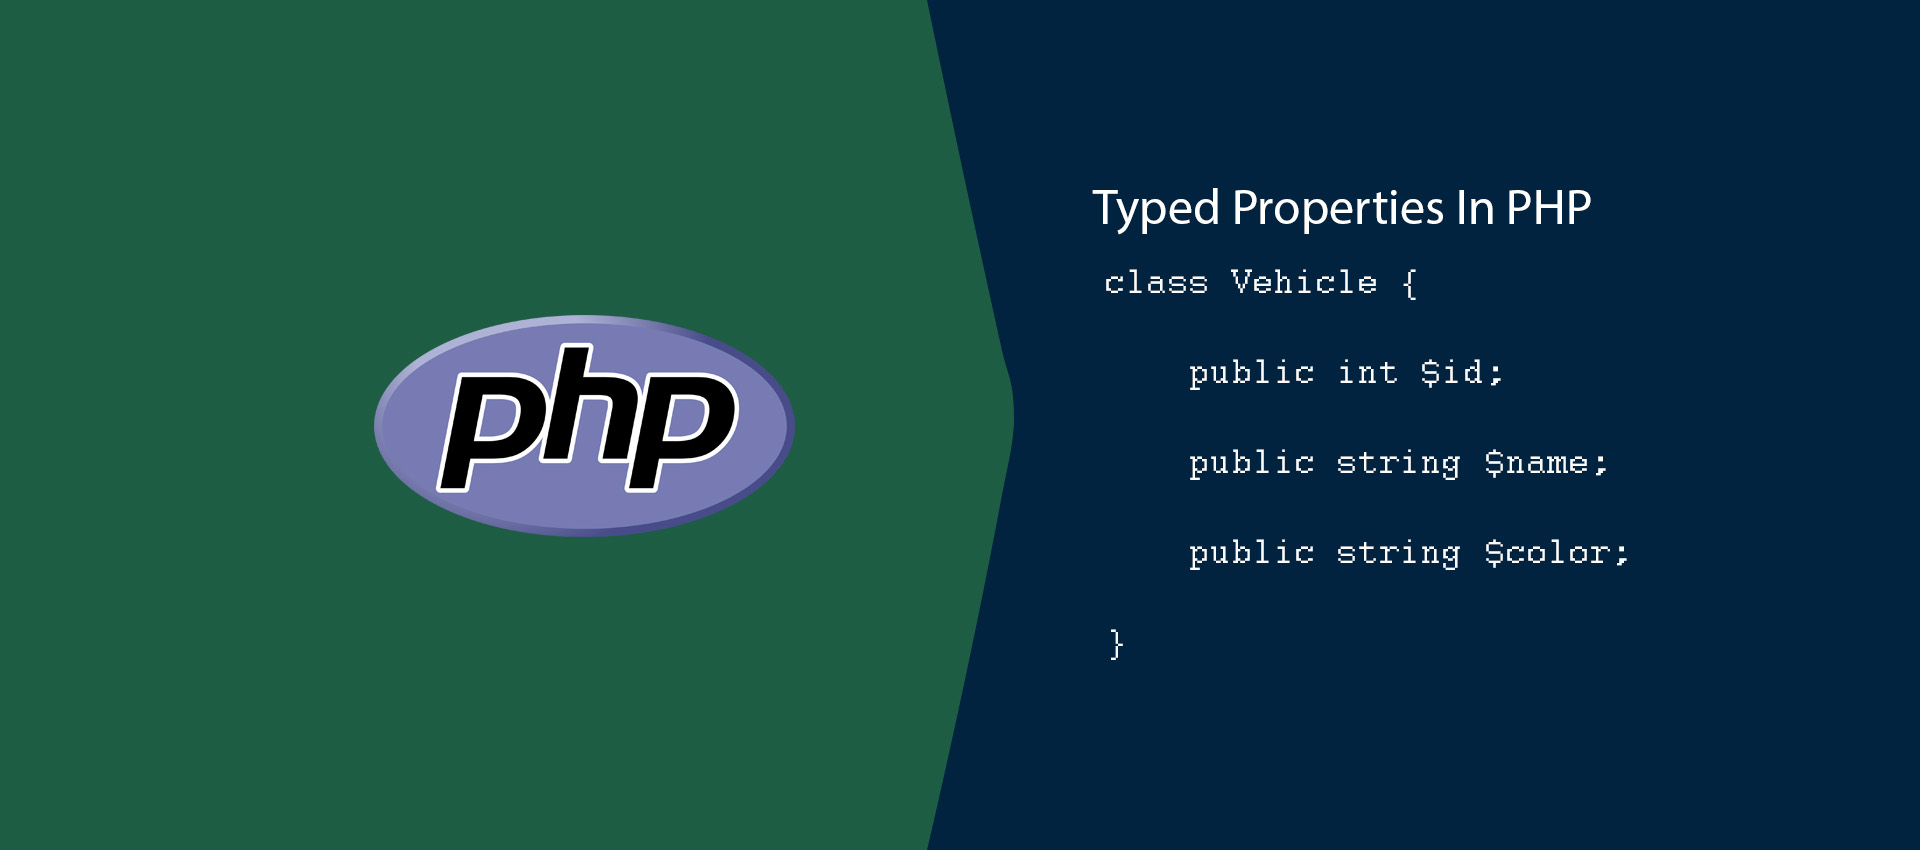 Typed Properties In PHP